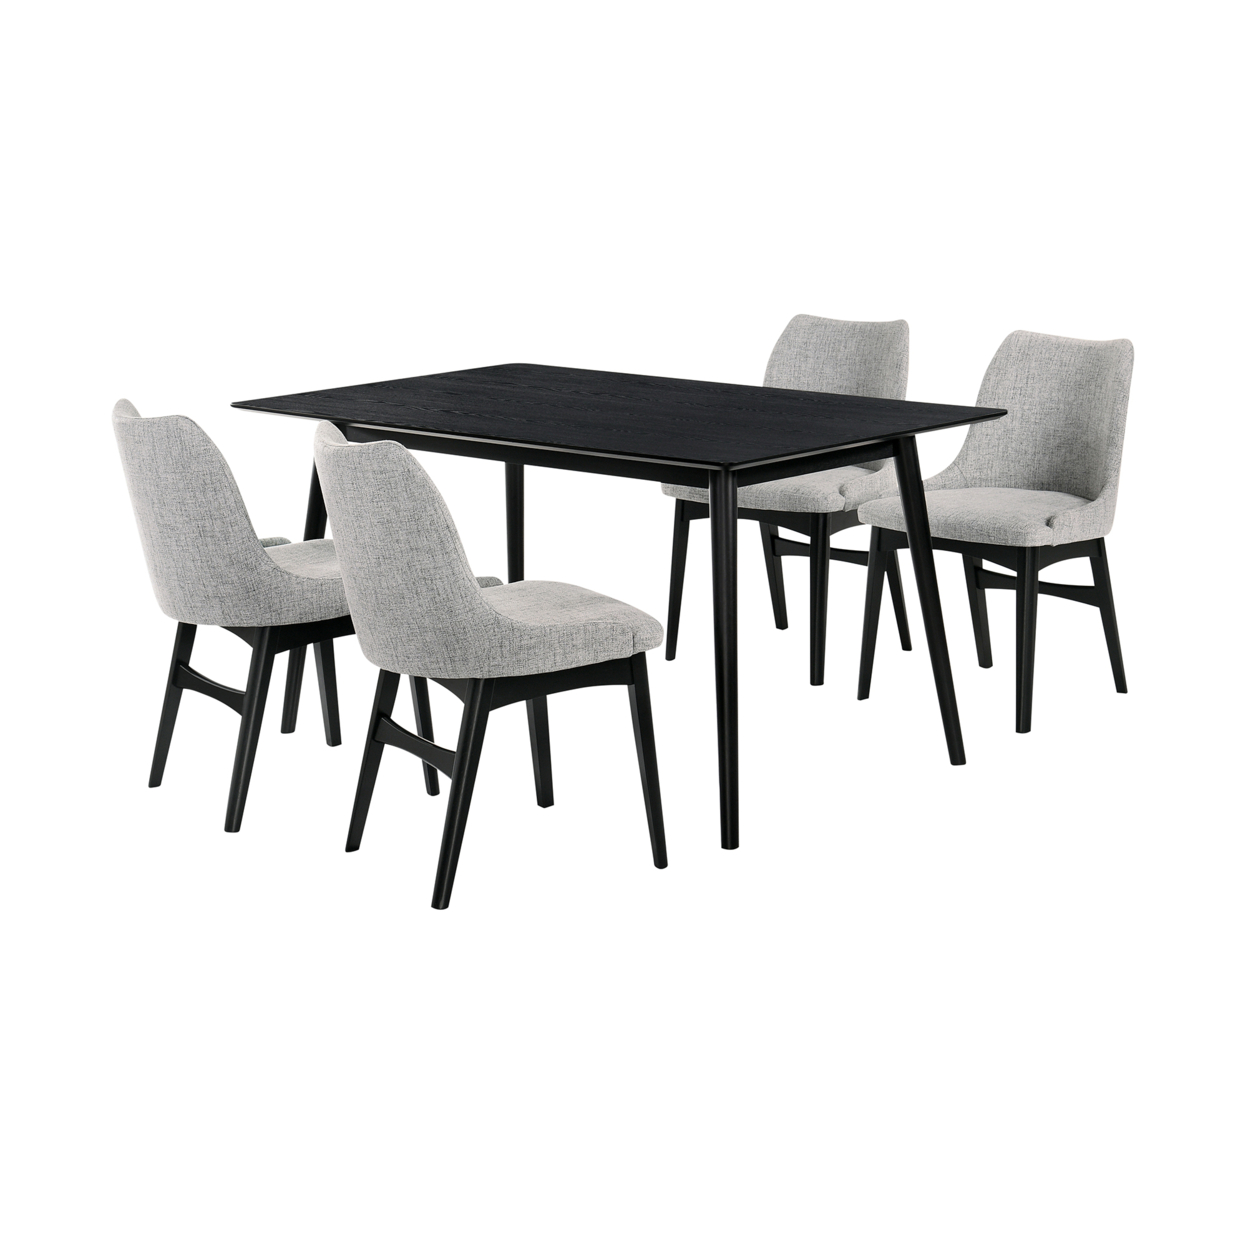 5 Piece Dining Set With Curved Back Chairs, Black And Gray- Saltoro Sherpi